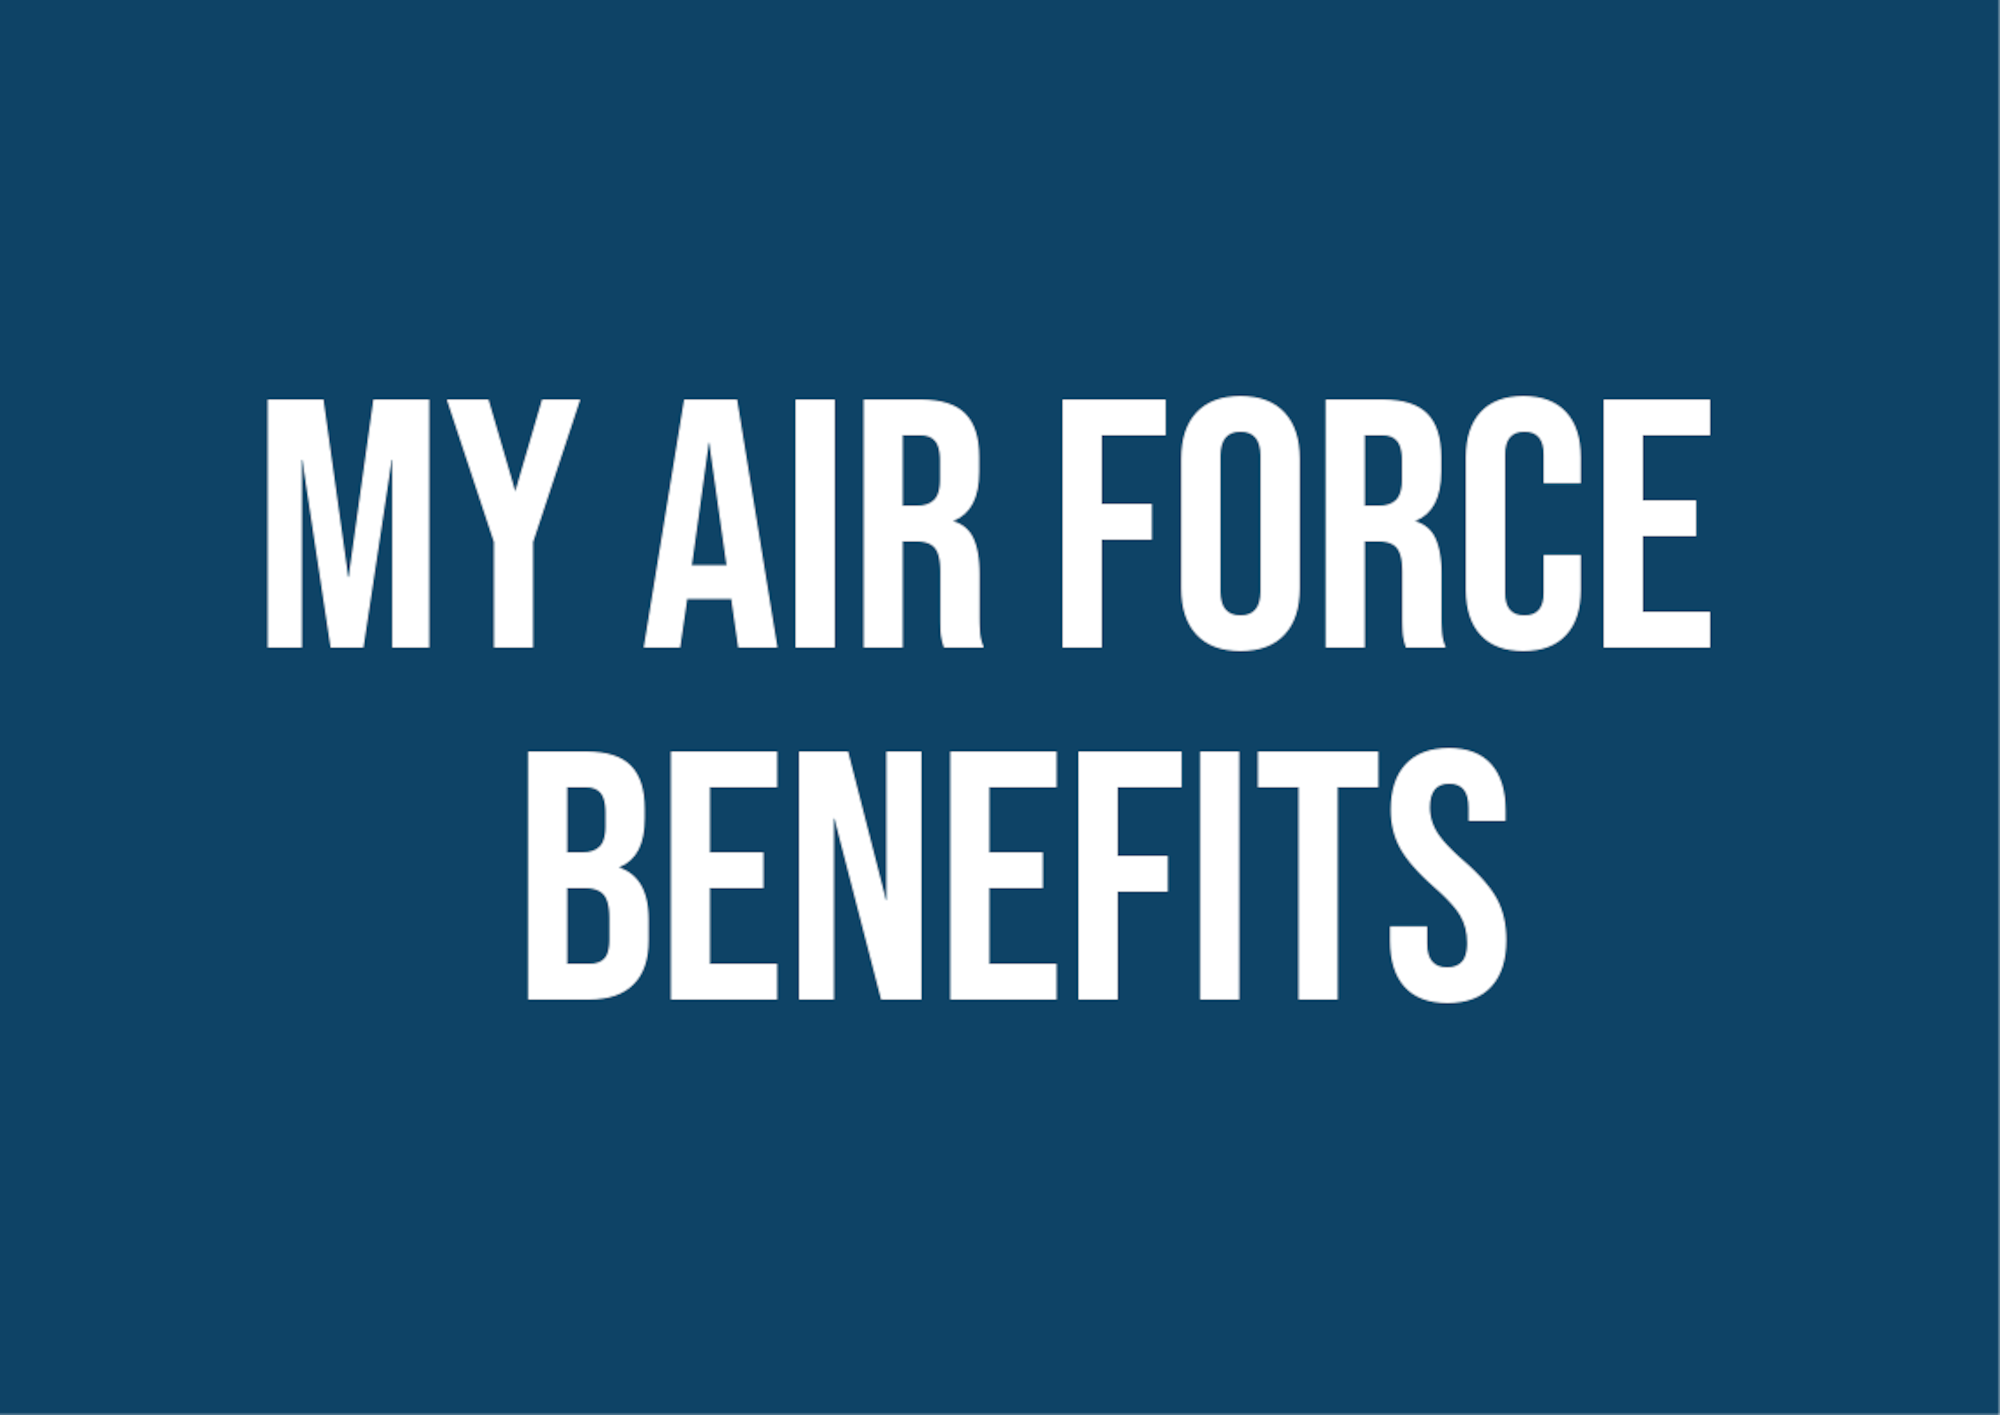 Launch button for the My Air Force Benefits website.